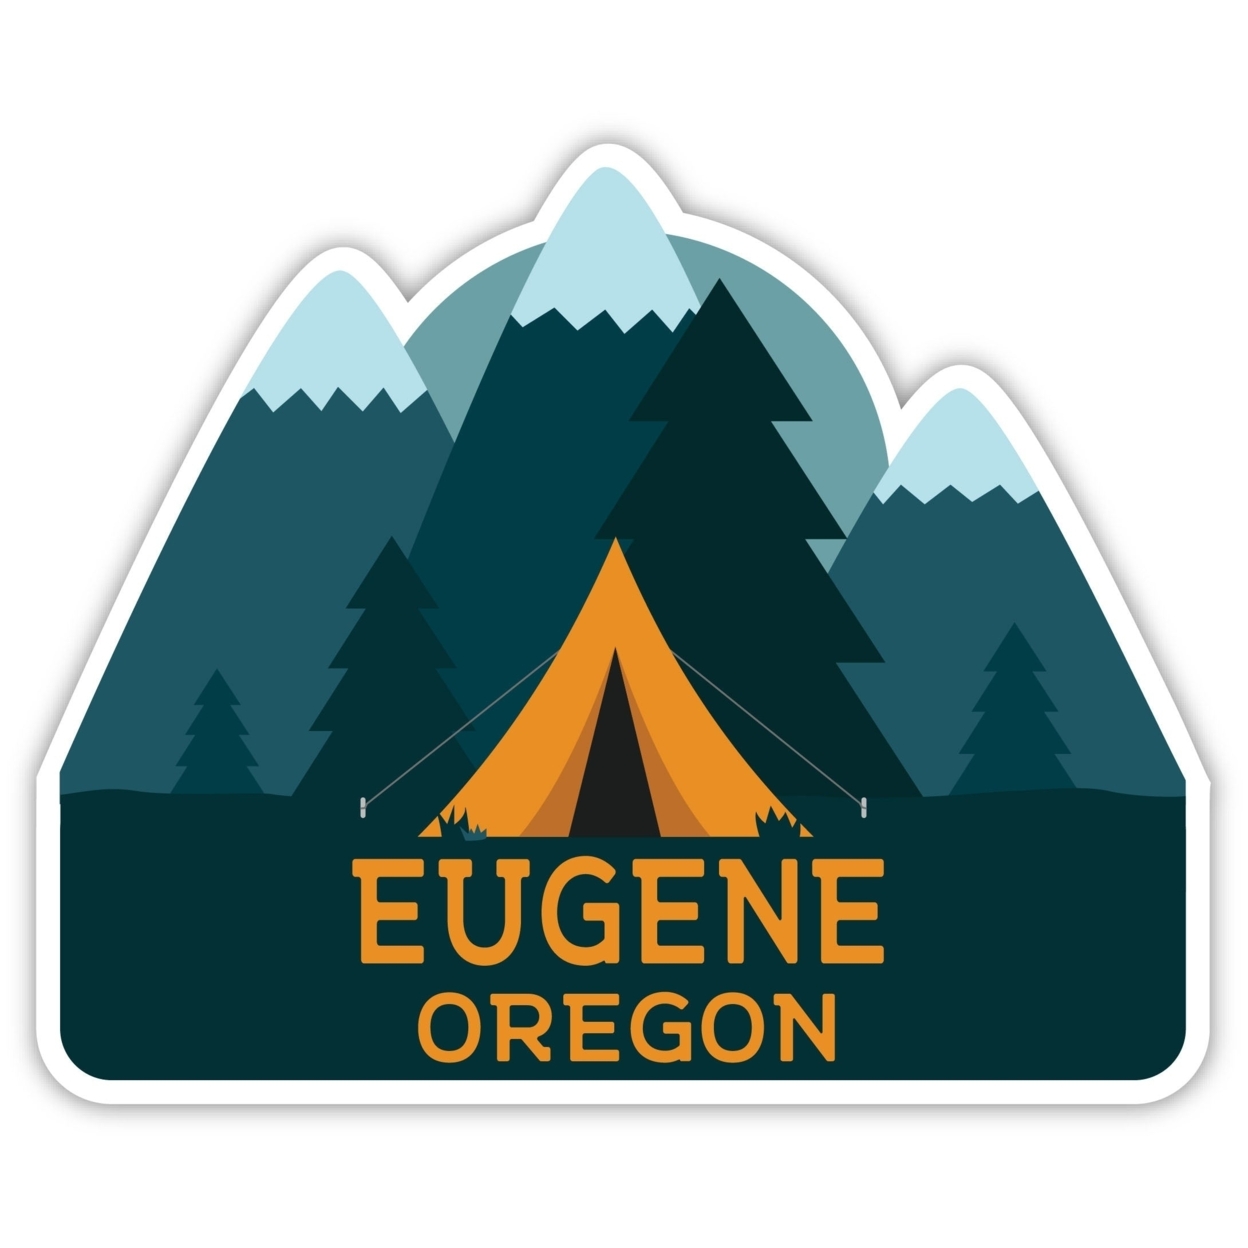 Eugene Oregon Souvenir Decorative Stickers (Choose Theme And Size) - 4-Pack, 10-Inch, Camp Life